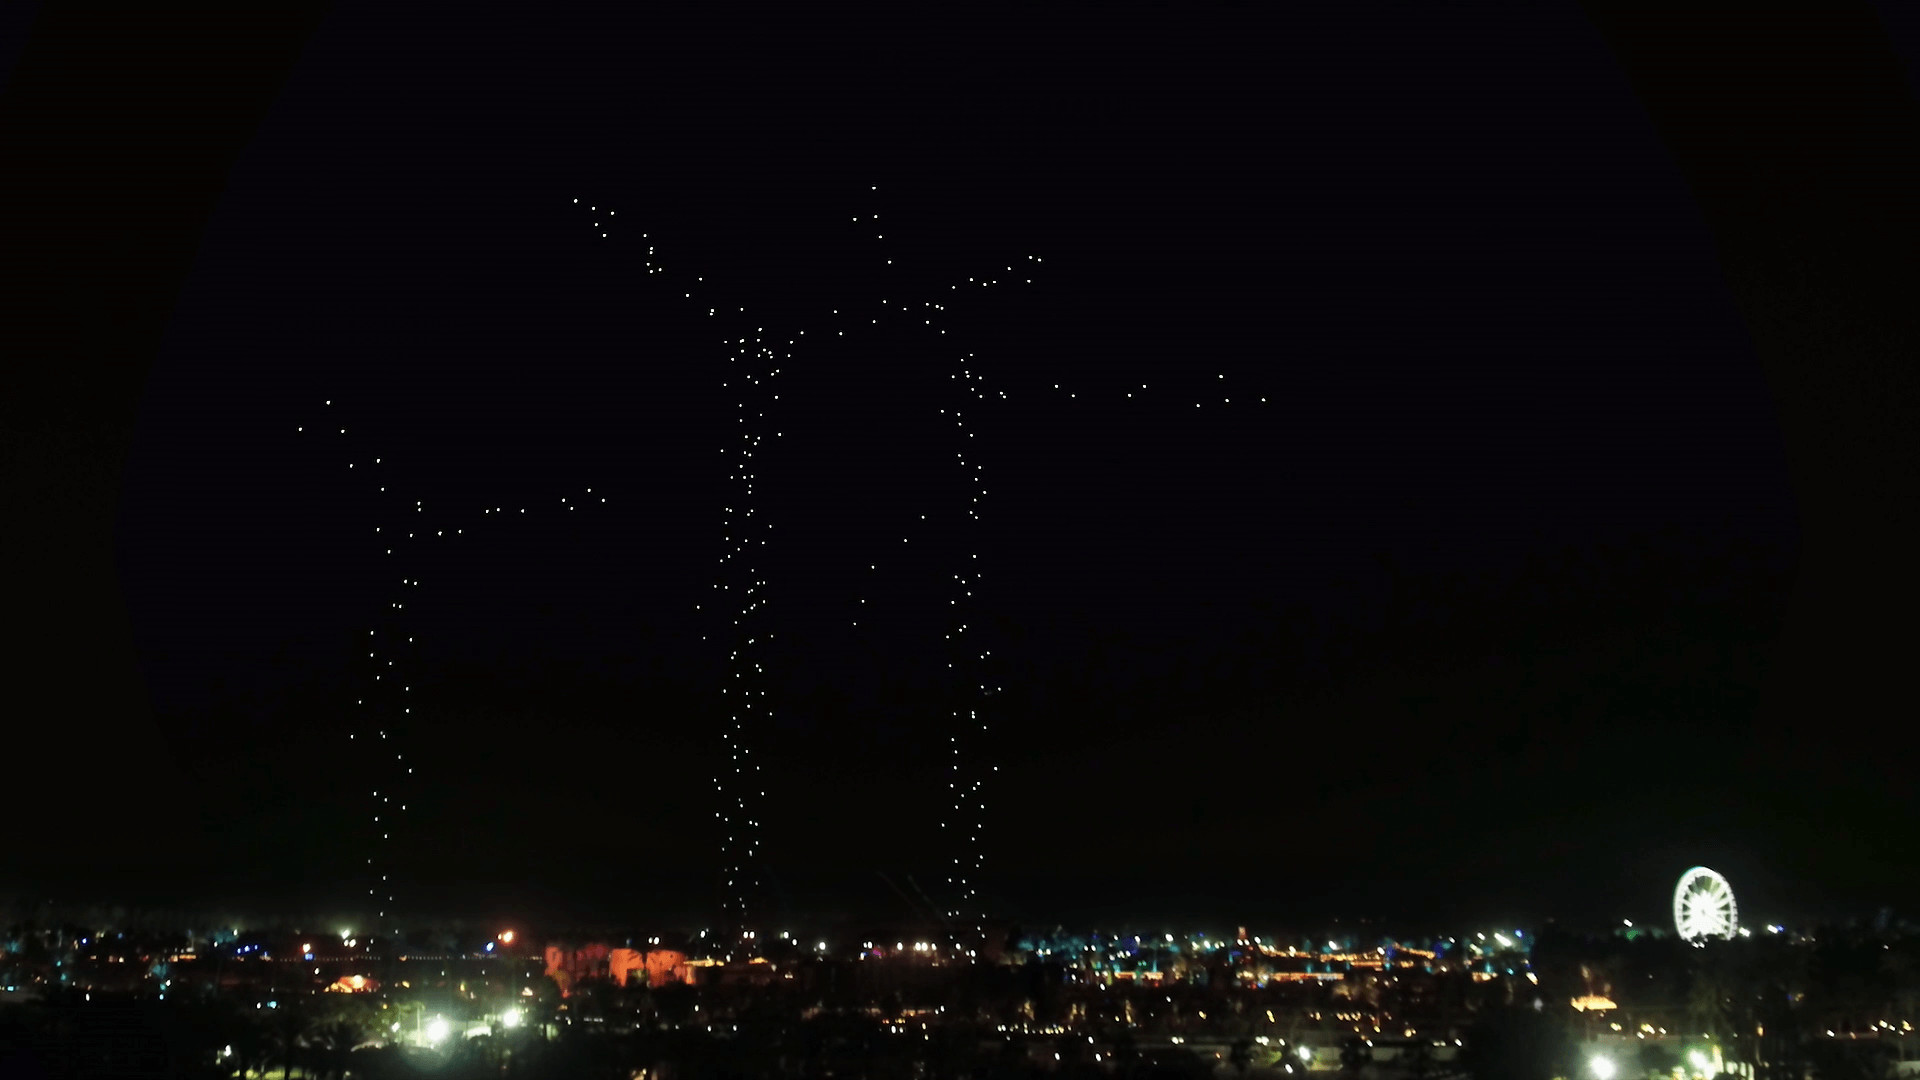 1920x1080 Coachella drones take over the music festival with Intel's newest light show